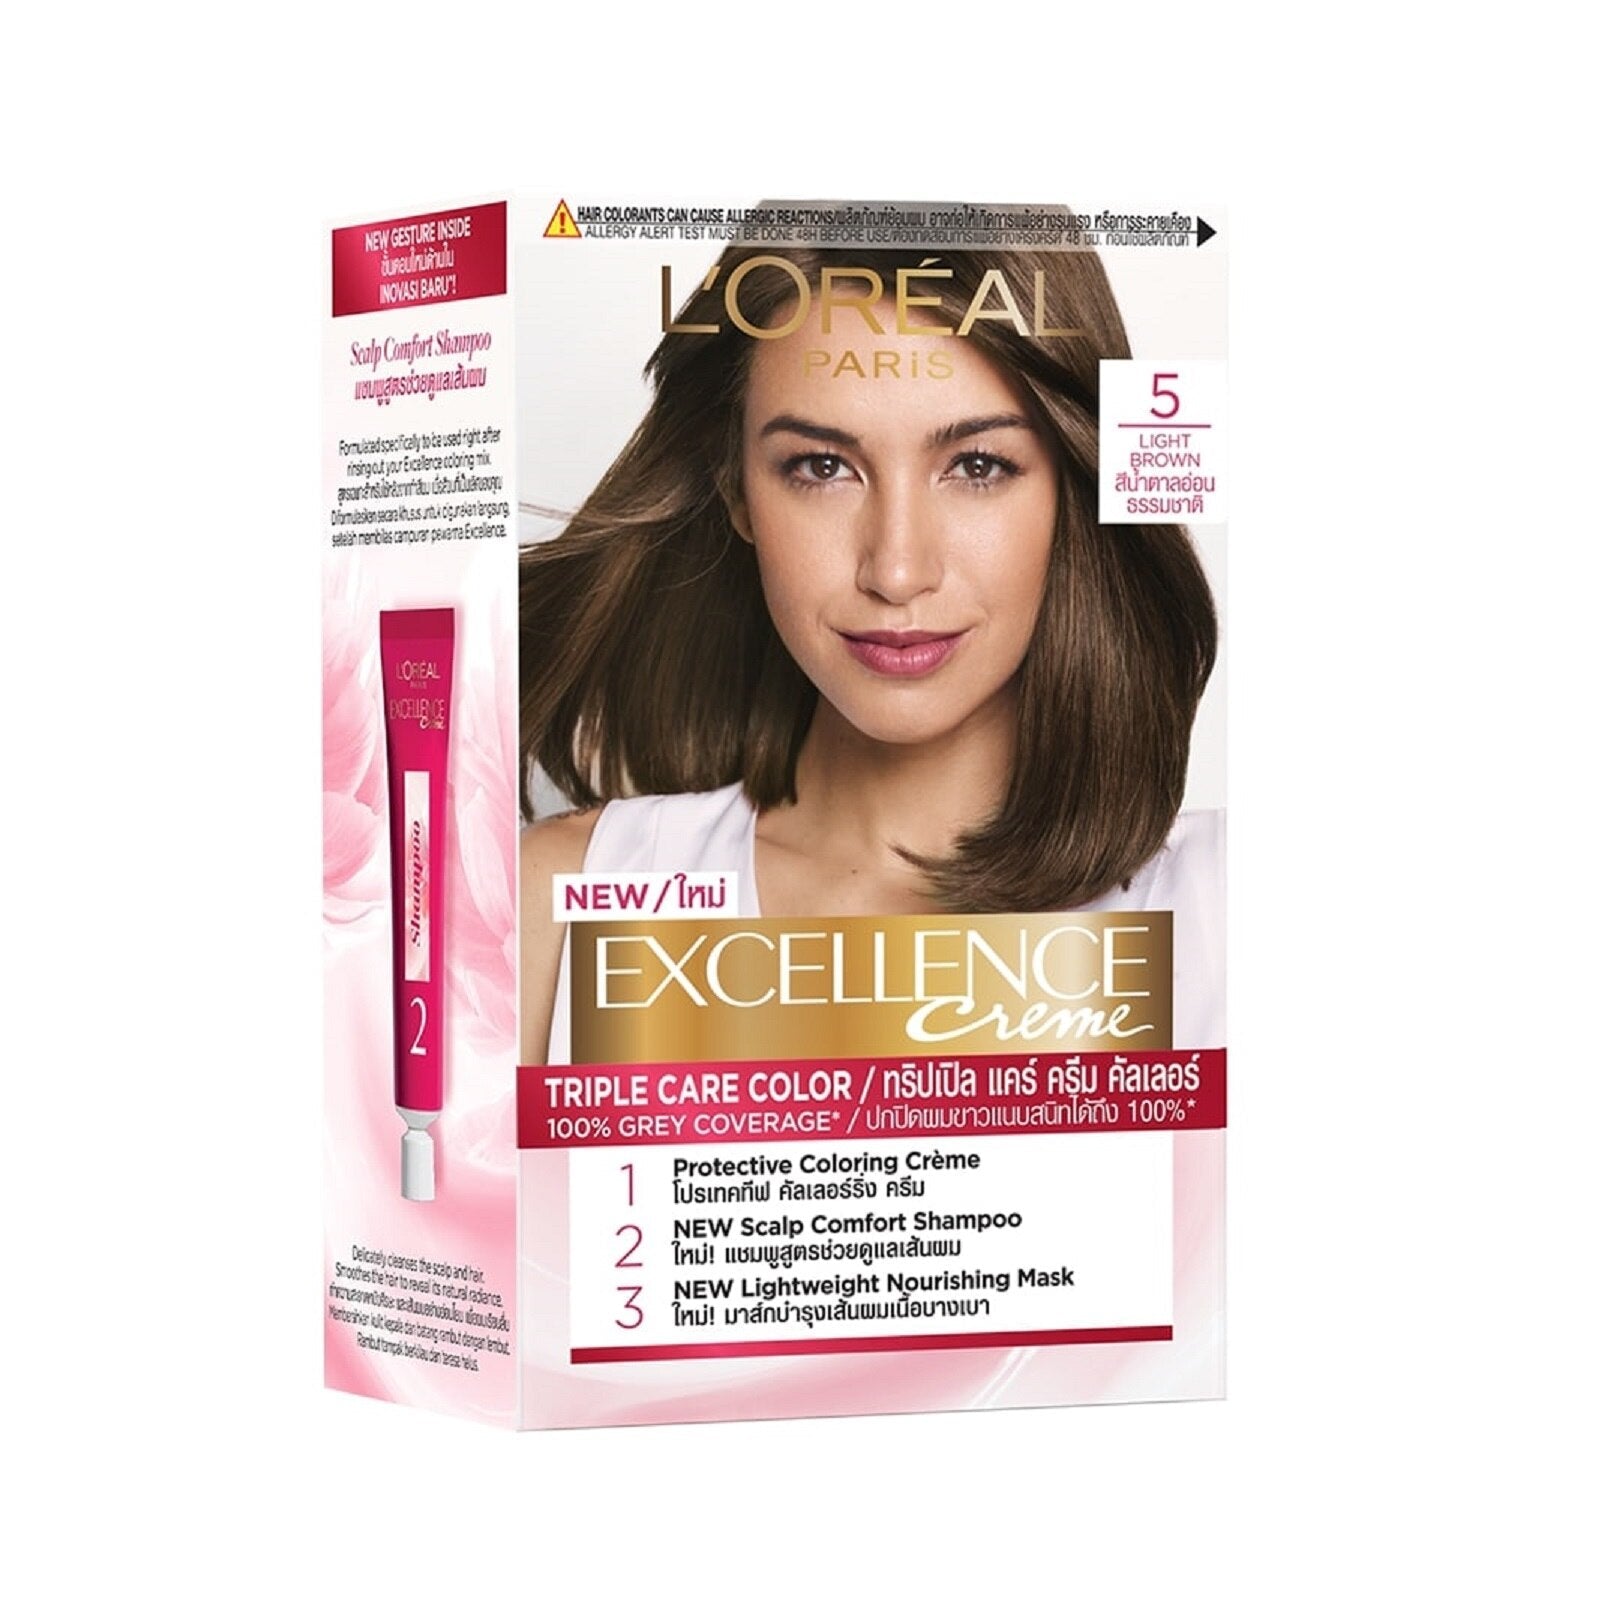 Loreal Paris Excellence 515 Iced Brown  3  Compare Prices